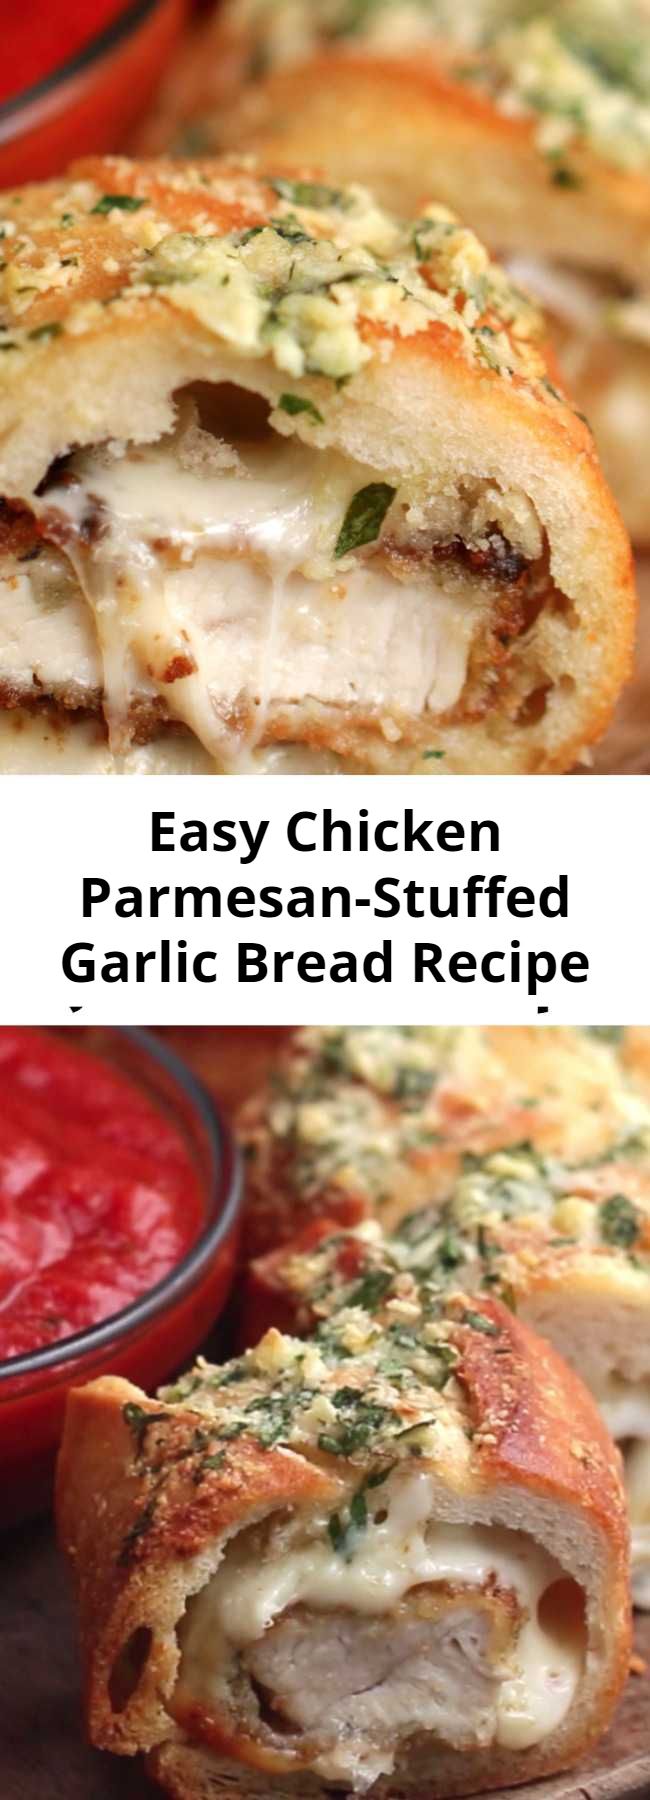 Easy Chicken Parmesan-Stuffed Garlic Bread Recipe - Super easy to stuff the bread just make sure you get a big baguette and not a little one. Loved it!